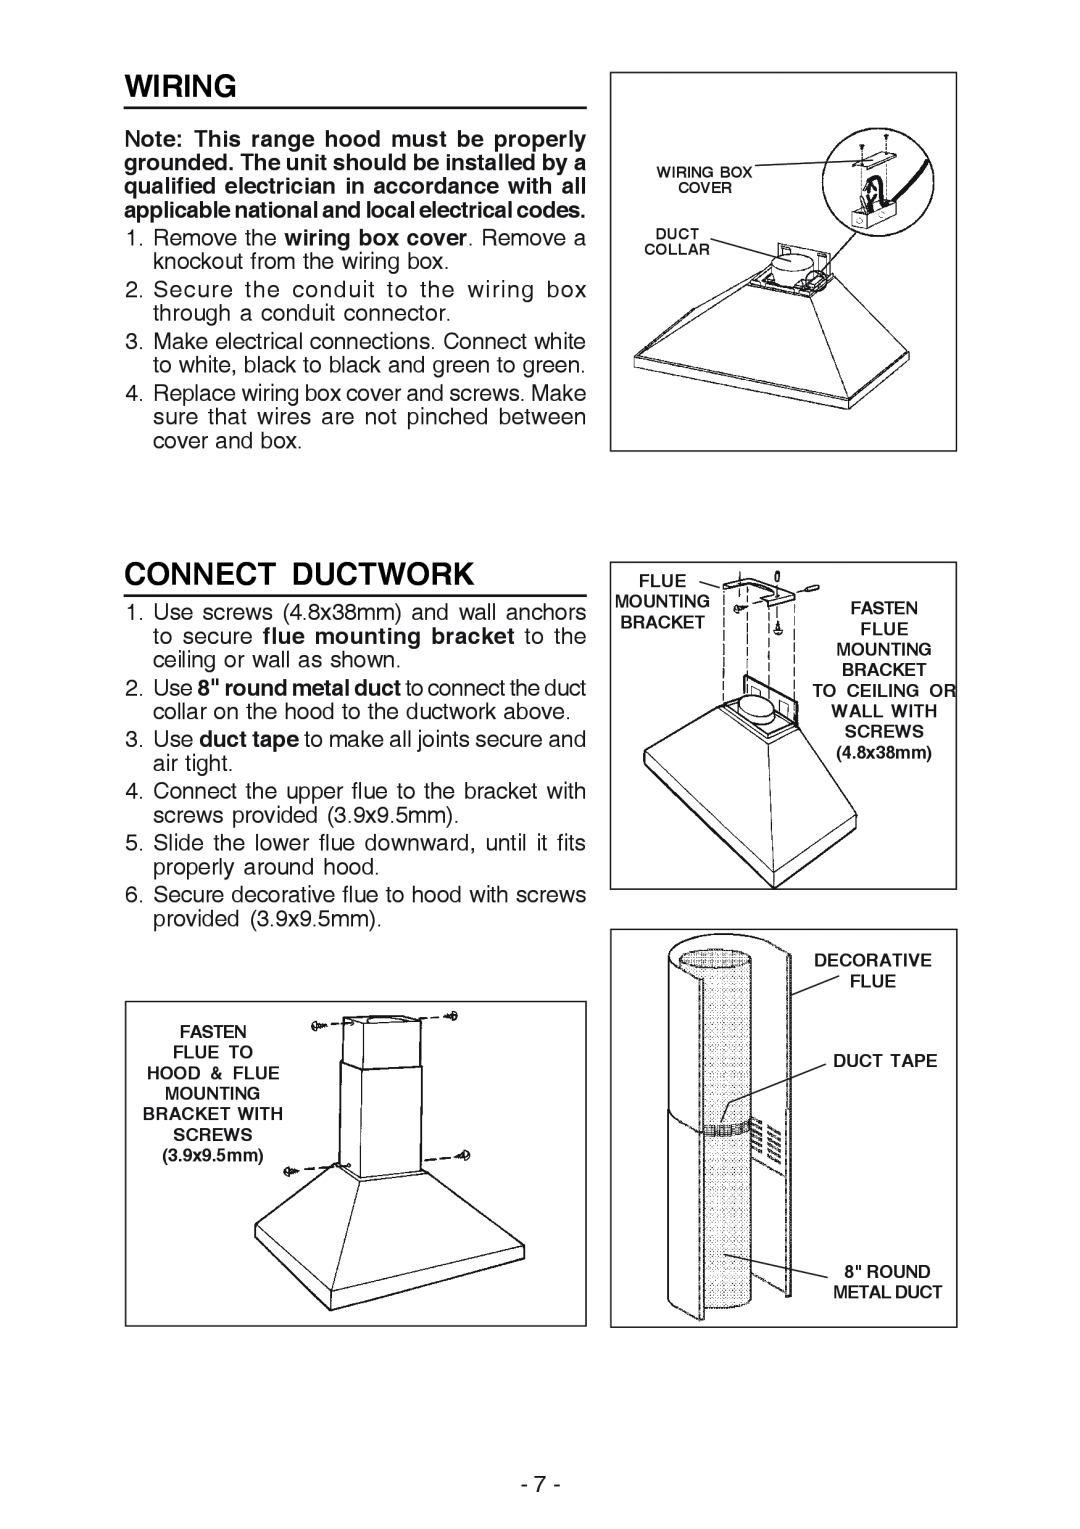 Best K42 manual Wiring, Connect Ductwork 